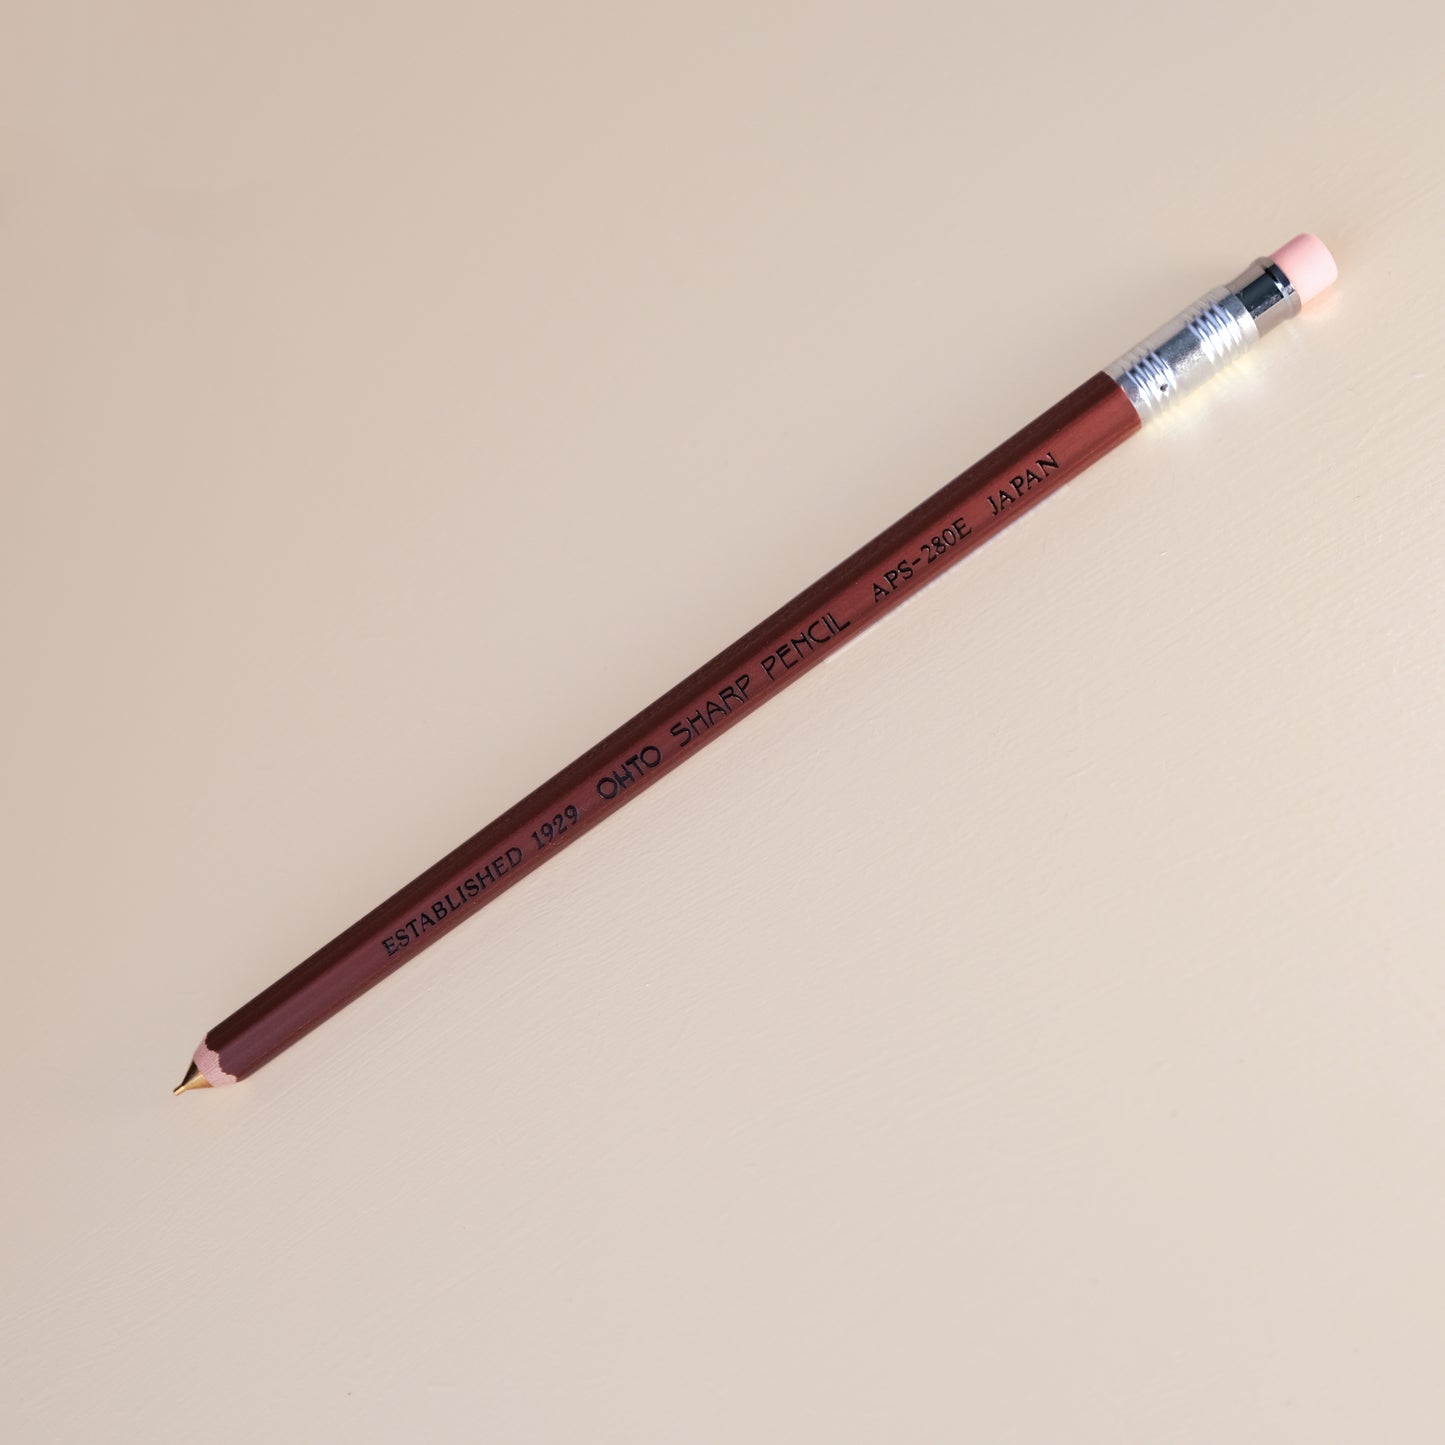 OHTO Wooden Mechanical Pencil - Brown 0.5 mm